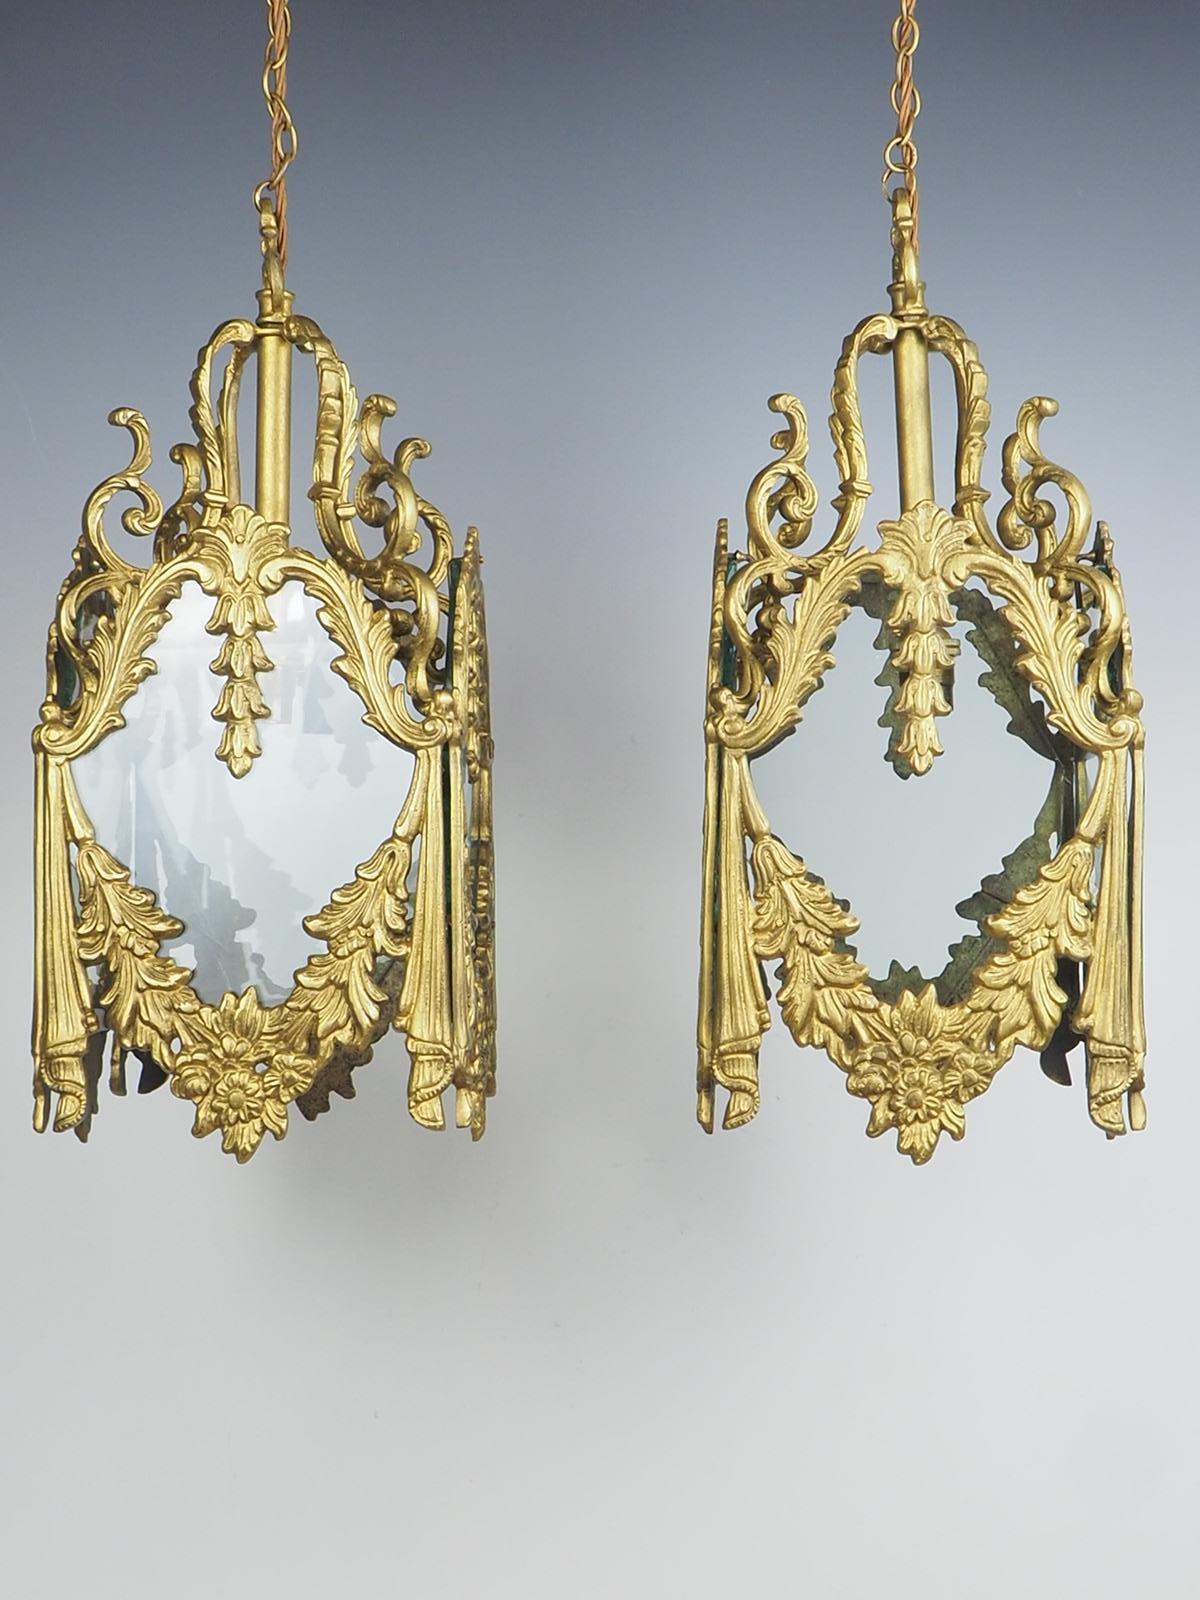 Oplulant Pair of Decorative French Rococo Gilt Brass Lanterns exude elegance and sophistication with their superb quality craftsmanship. Made from heavy gilt brass, these lanterns are built to last and make a lasting impression. Each lantern